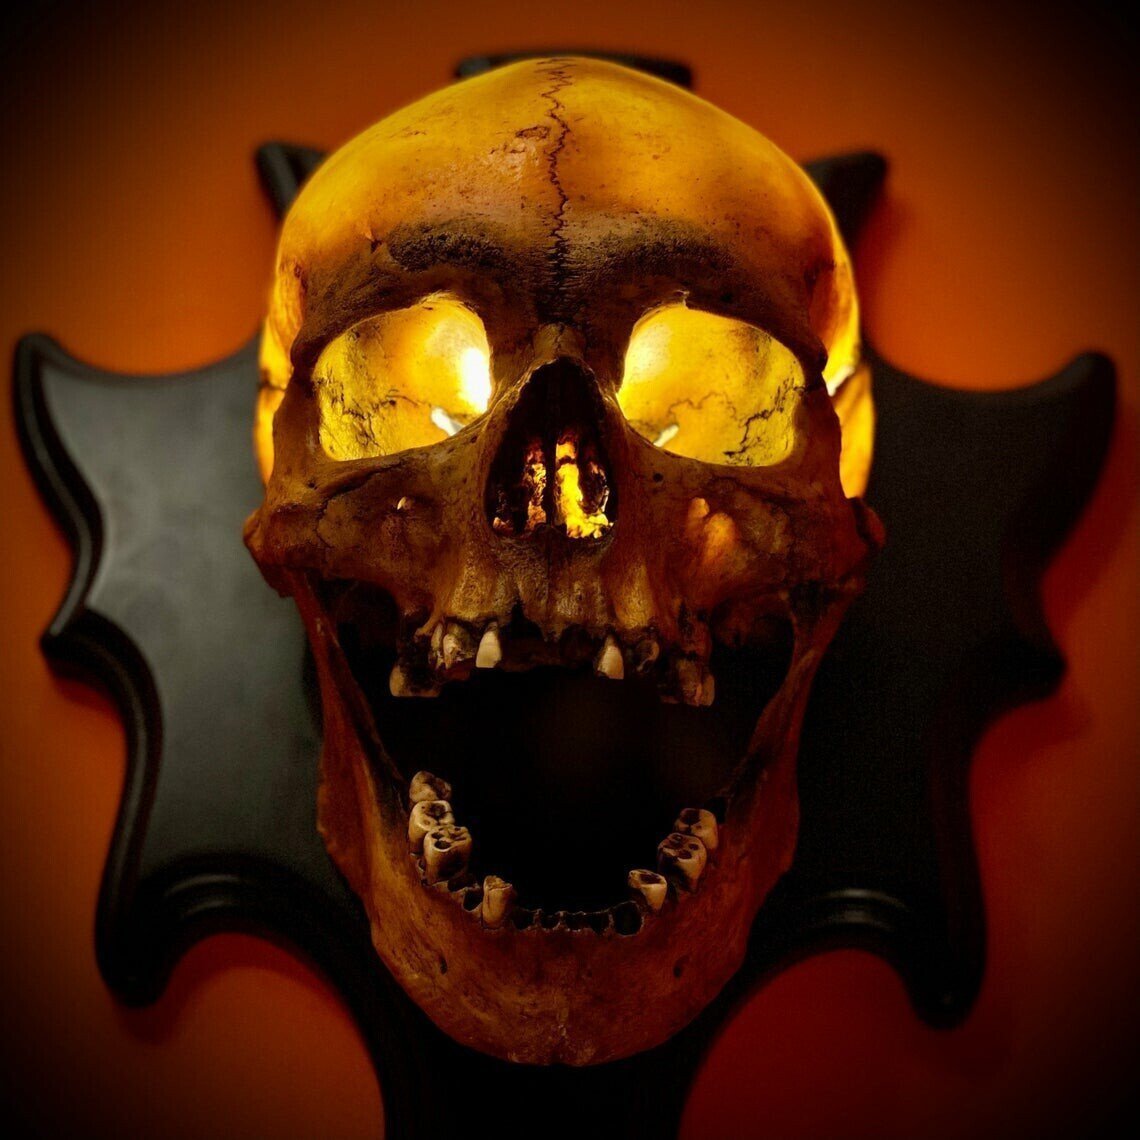 Get Ready for Halloween with our Skull Lamp - Pre Sale 49% OFF!